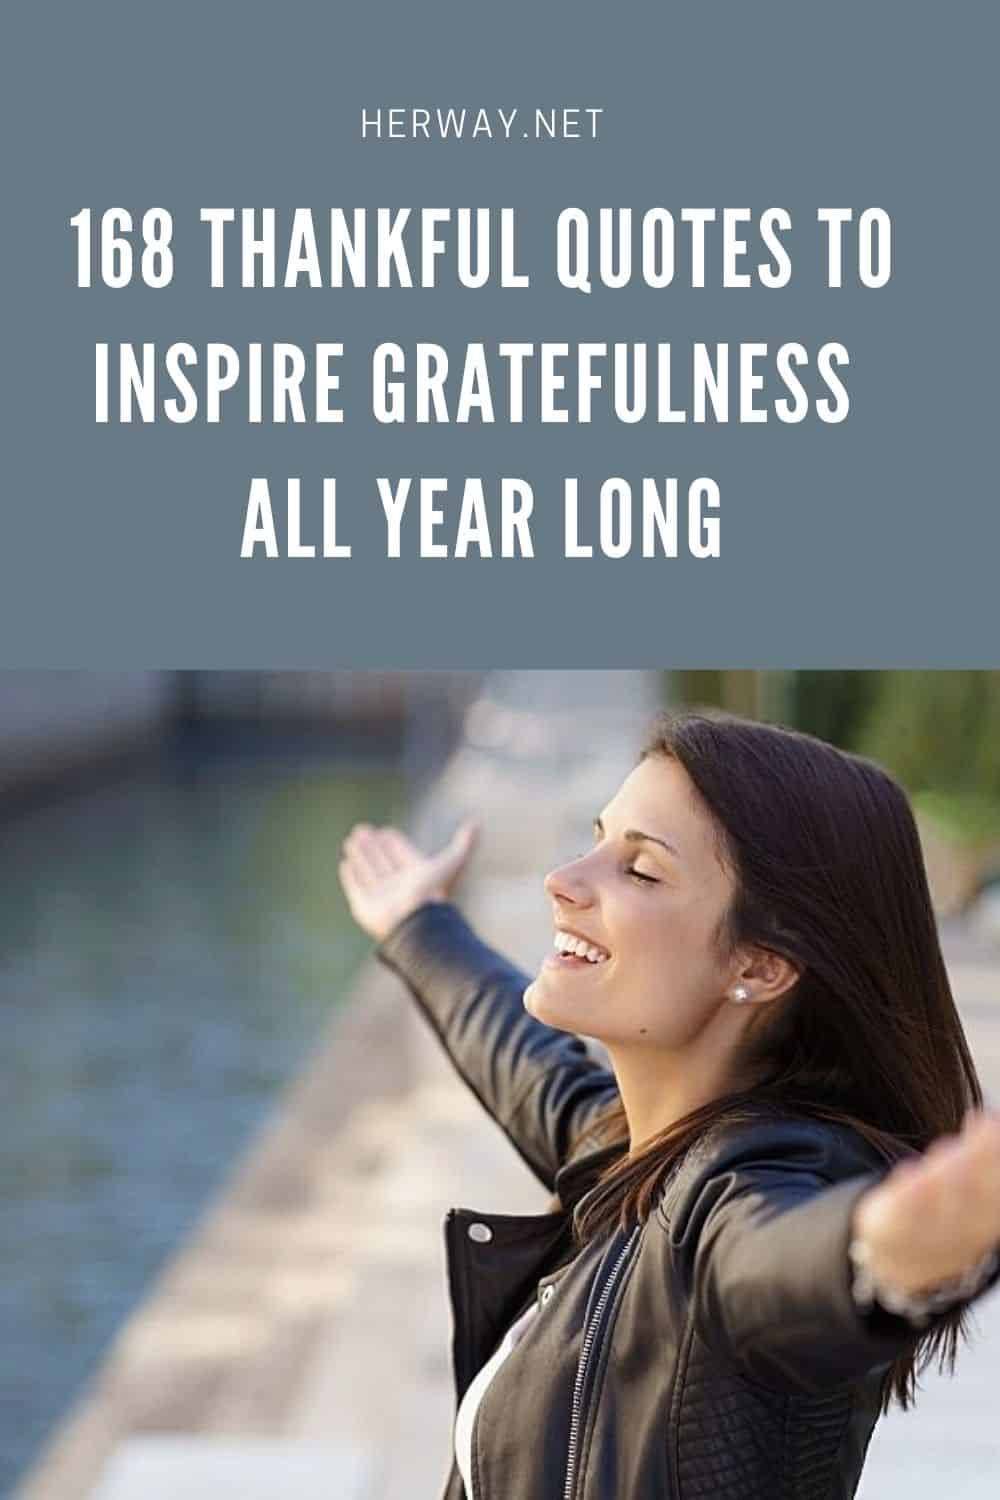 168 Thankful Quotes To Inspire Gratefulness All Year Long